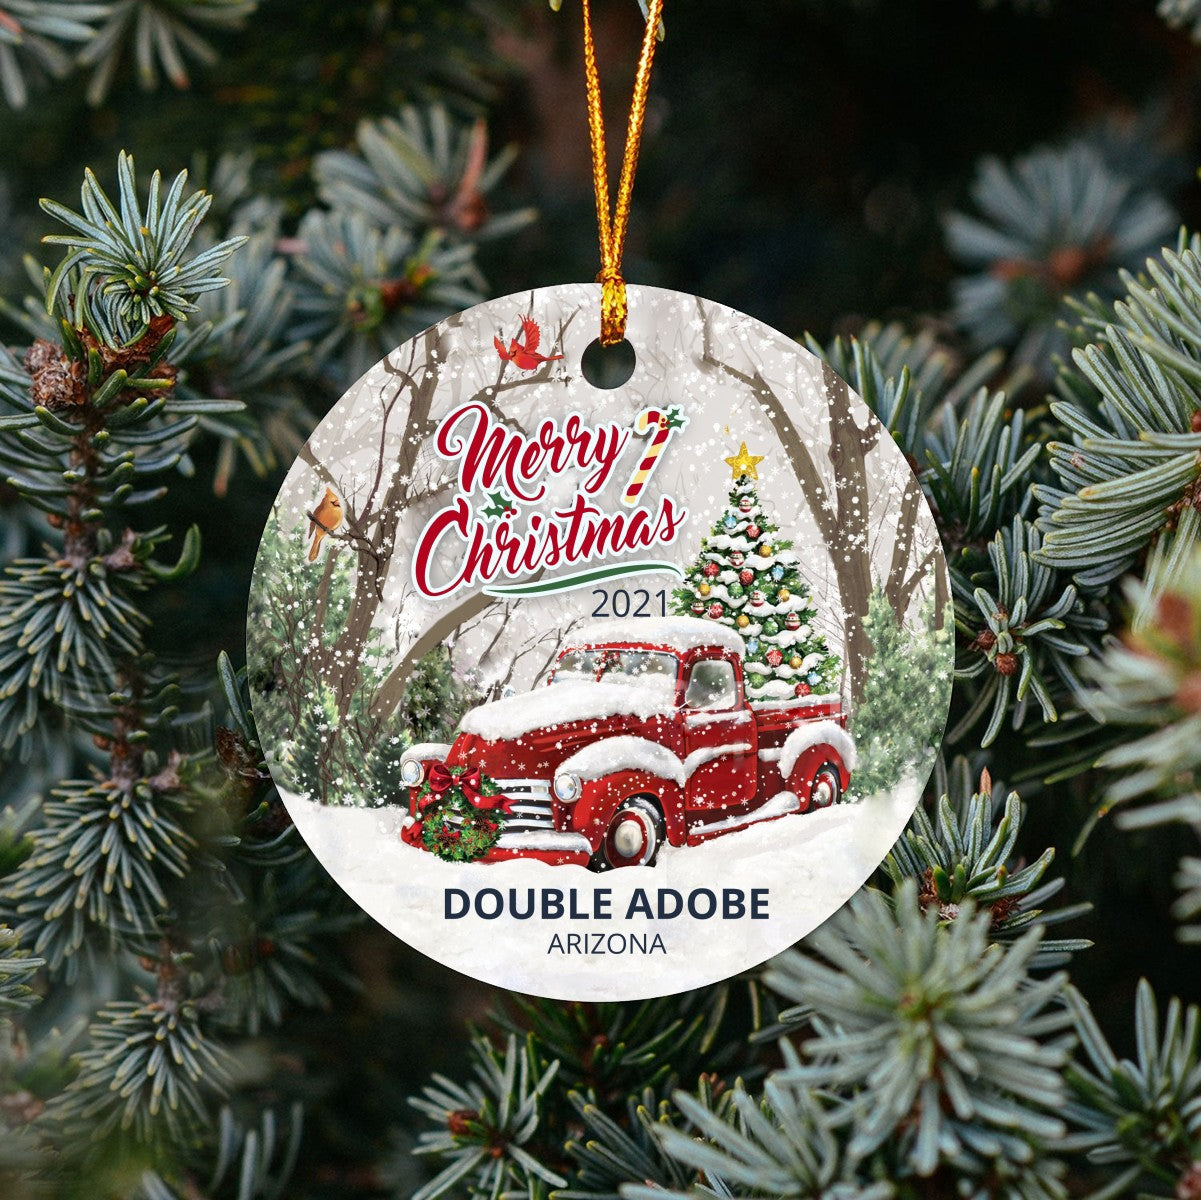 Christmas Tree Ornaments Double Adobe - Ornament With Name City, State Double Adobe Arizona AZ Ornament - Red Truck Xmas Ornaments 3'' Plastic Gift For Family, Friend And Housewarming